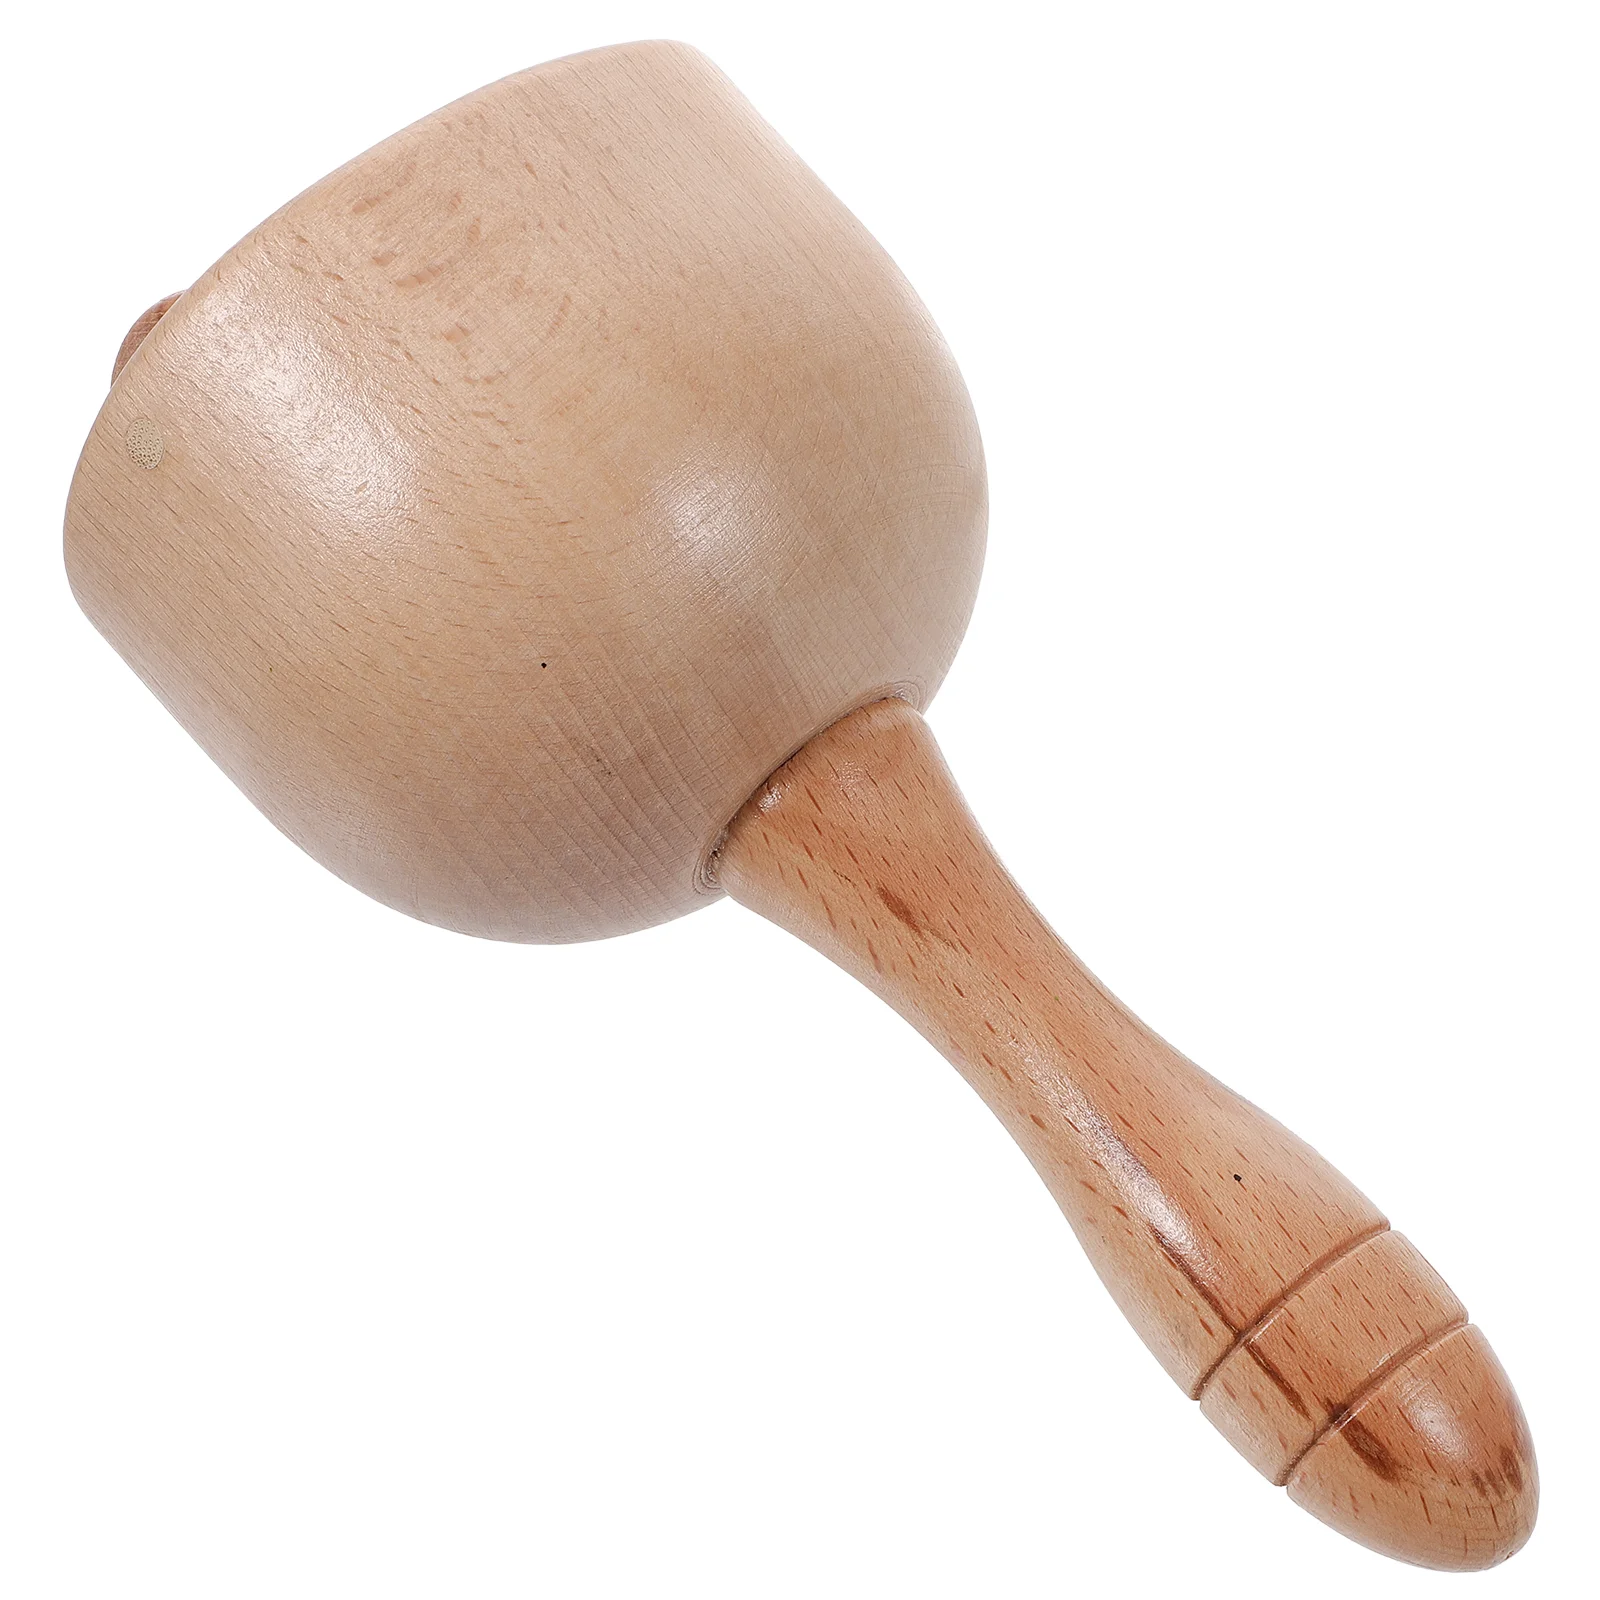 

Wood Tools Roller Cup Wooden Rod Tool Body Lymphatic Stick Drainage Muscle Scraping Handheld Manual Swedish Cups Cellulite Held